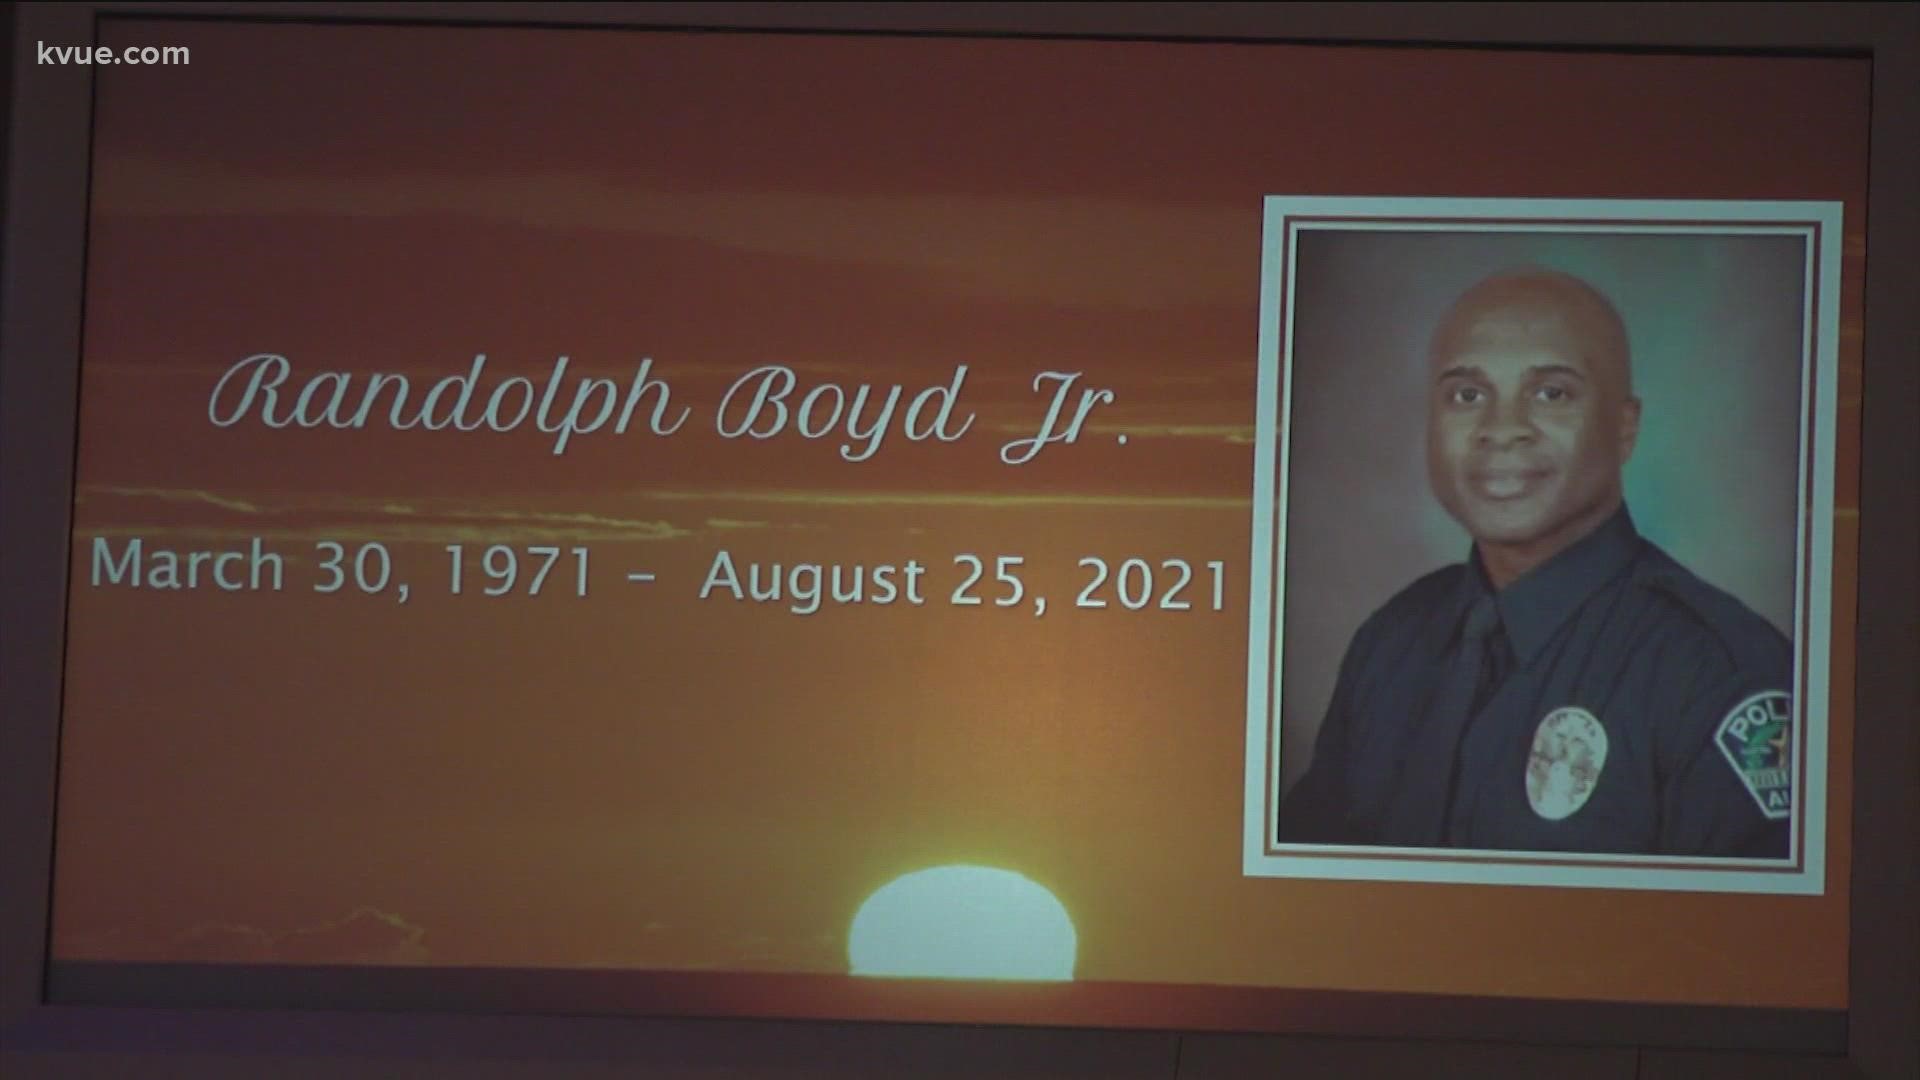 Senior Patrol Officer Randolph Boyd worked for the Austin Police Department but lived with his family in Killeen.